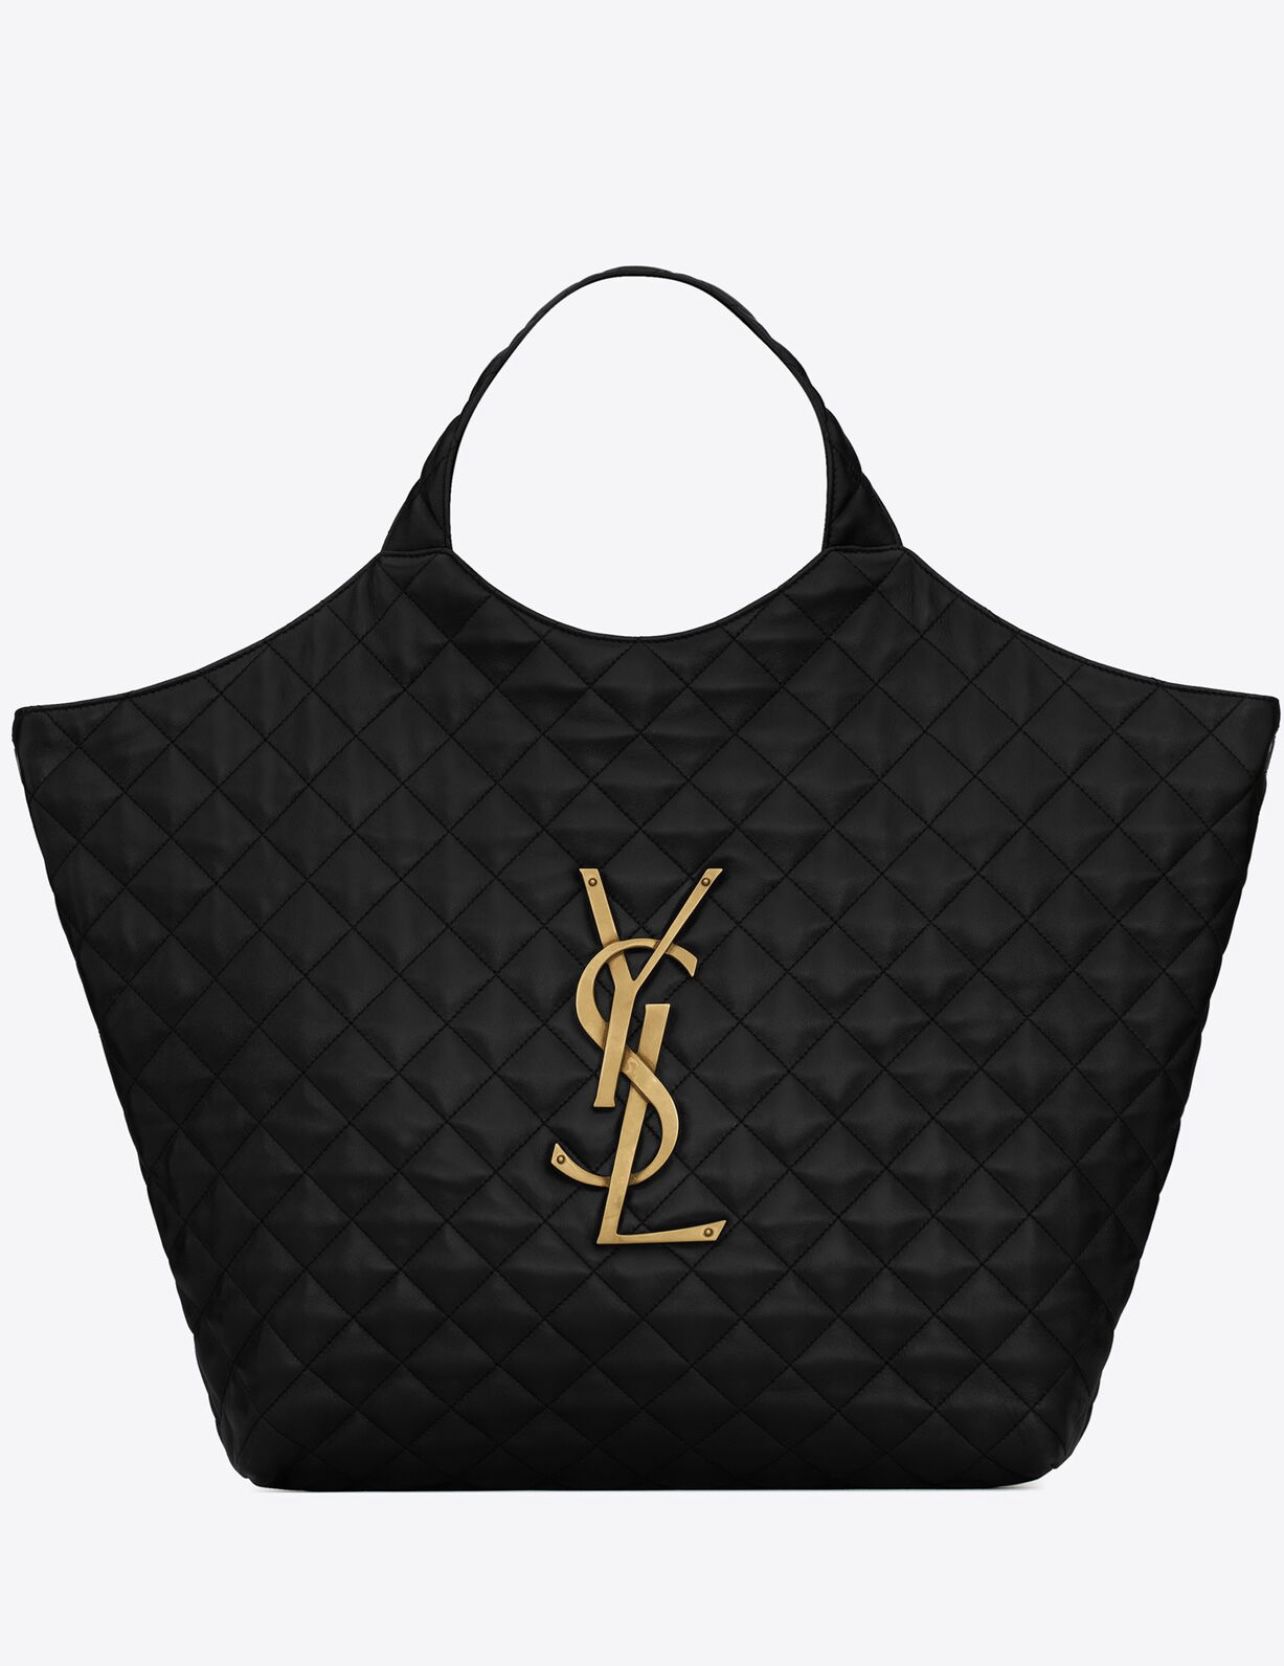 YSL ICARE MAXI SHOPPING BAG IN QUILTED LAMBSKIN for Sale